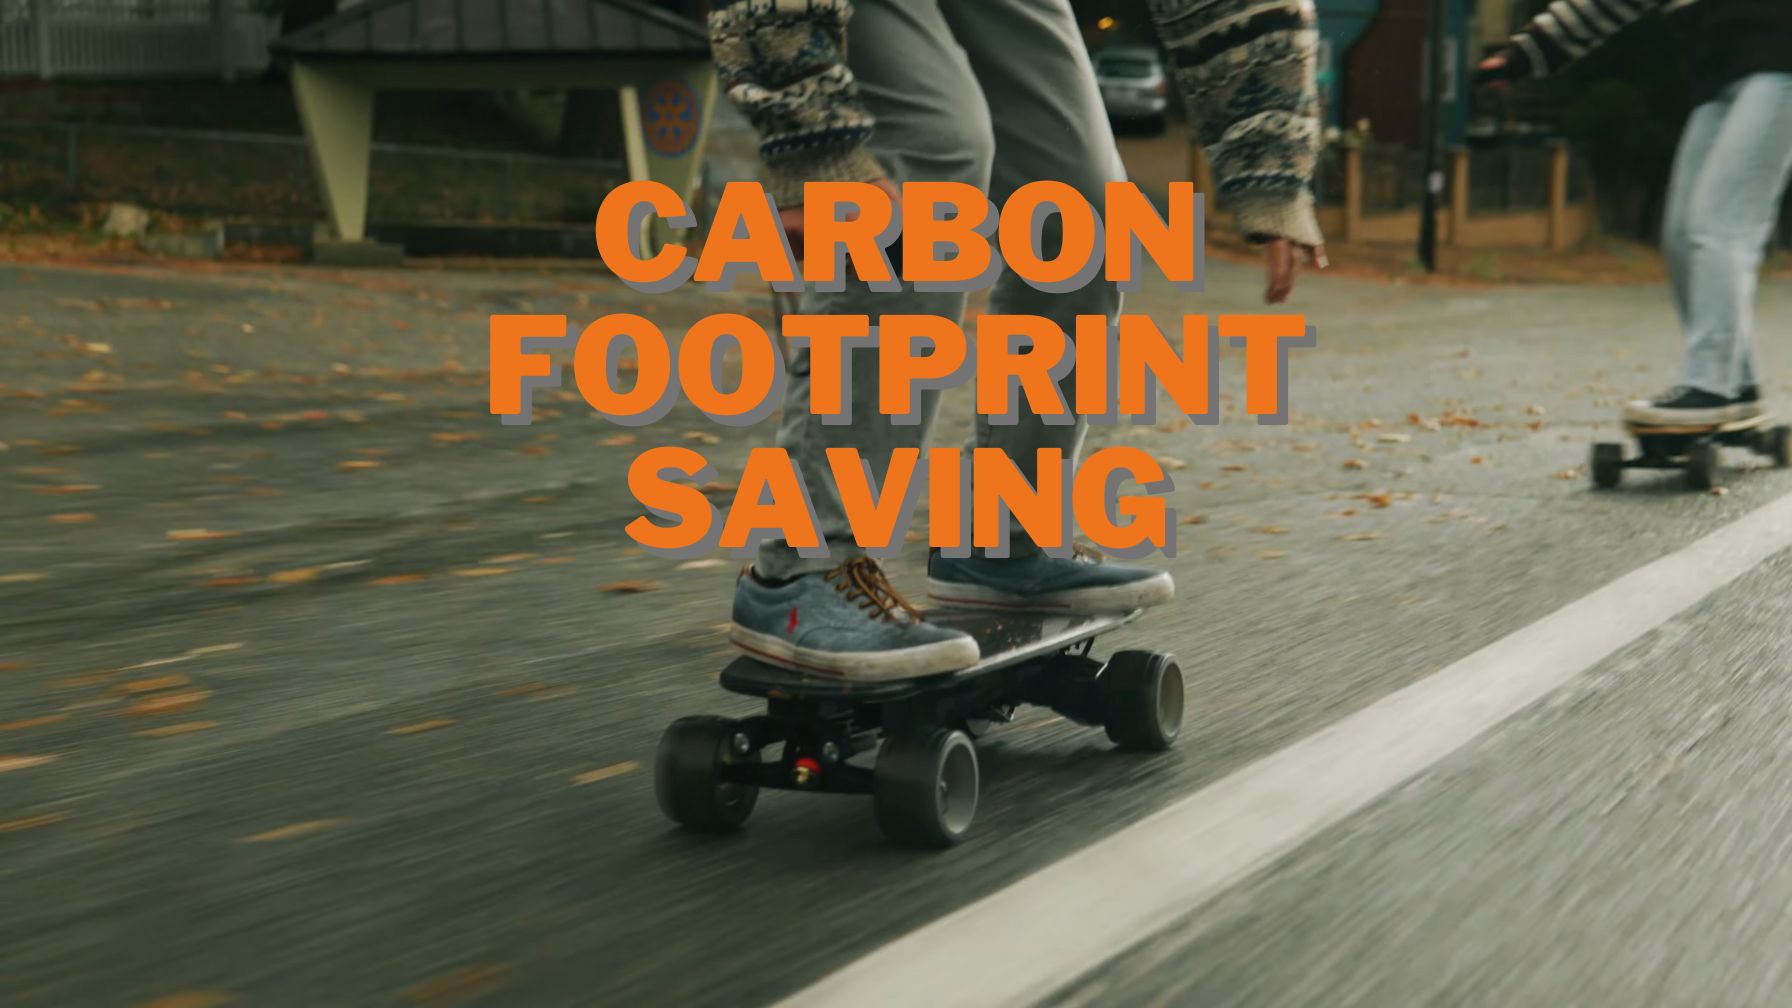 How much carbon footprint do you exactly save by switching from a fuel-powered car to an e-skateboard? - WOWGO BOARD